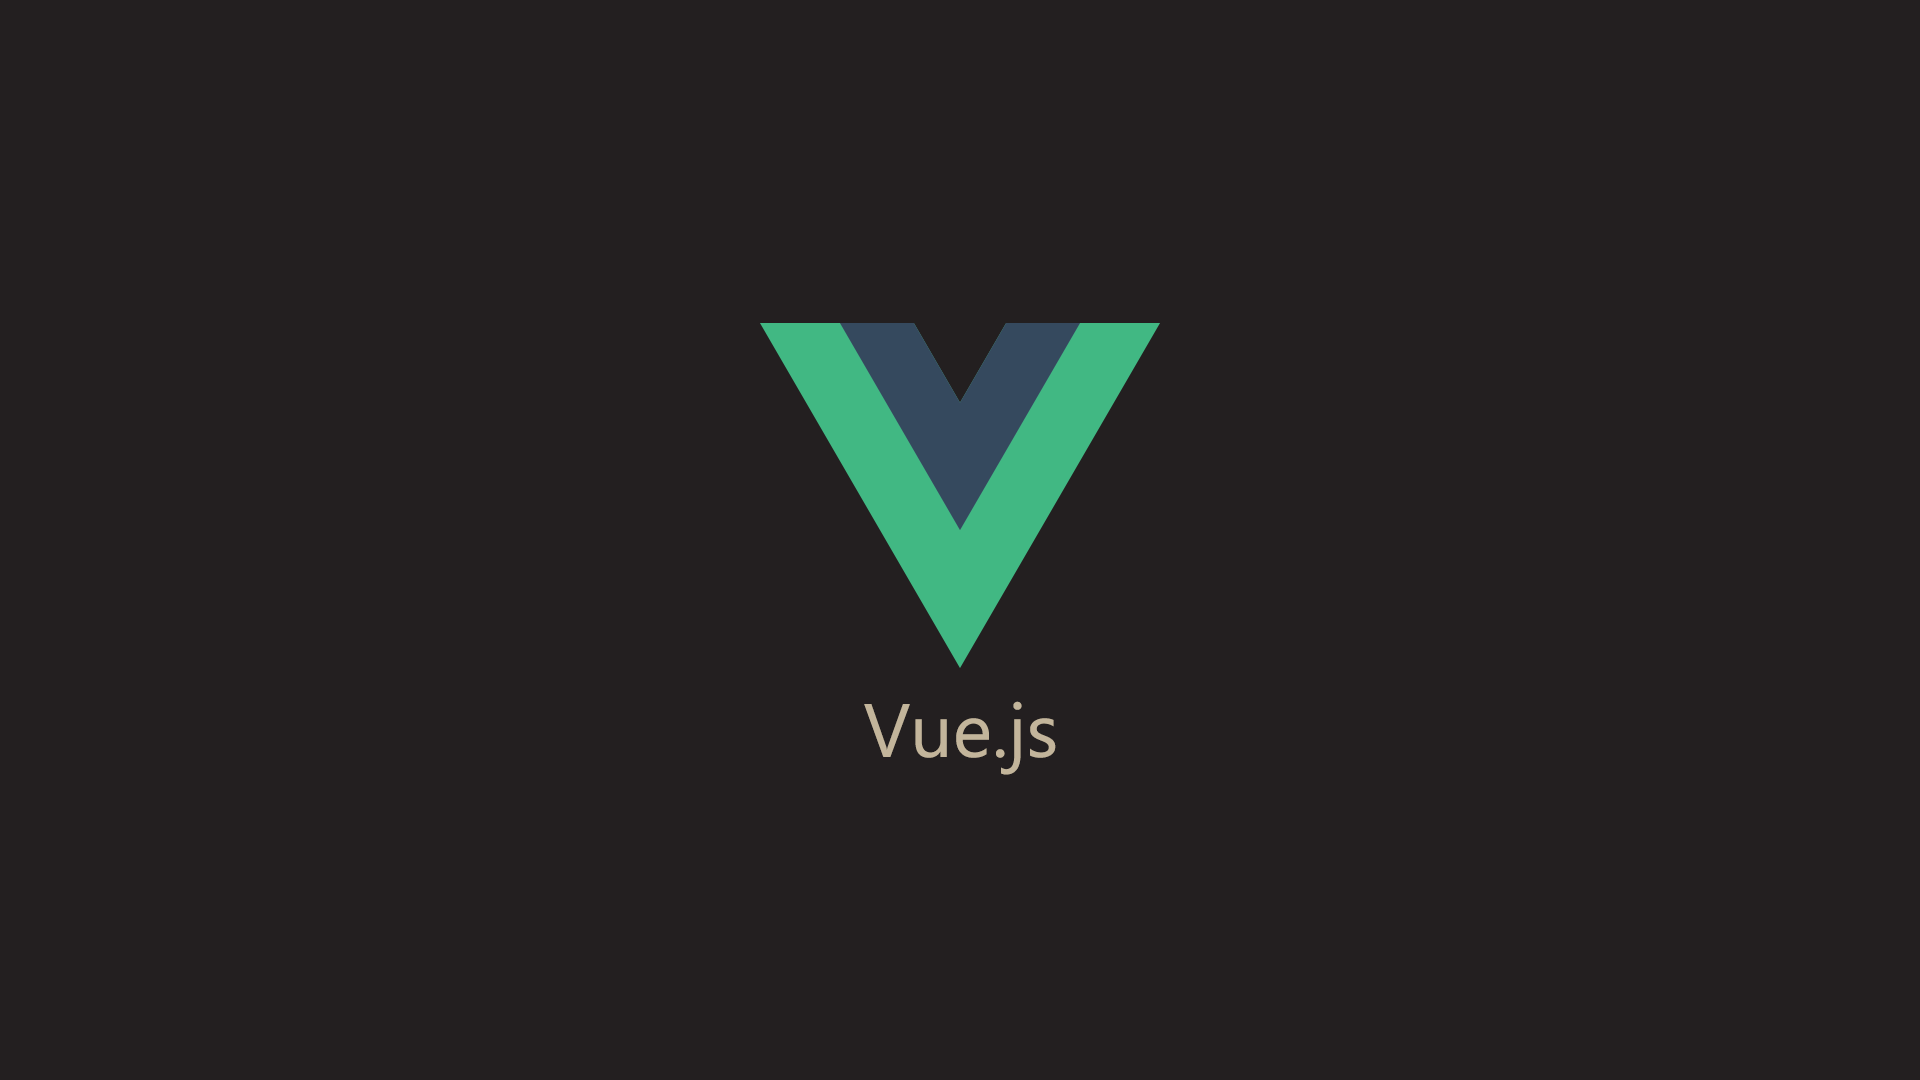 Custom events in Vue with $emit